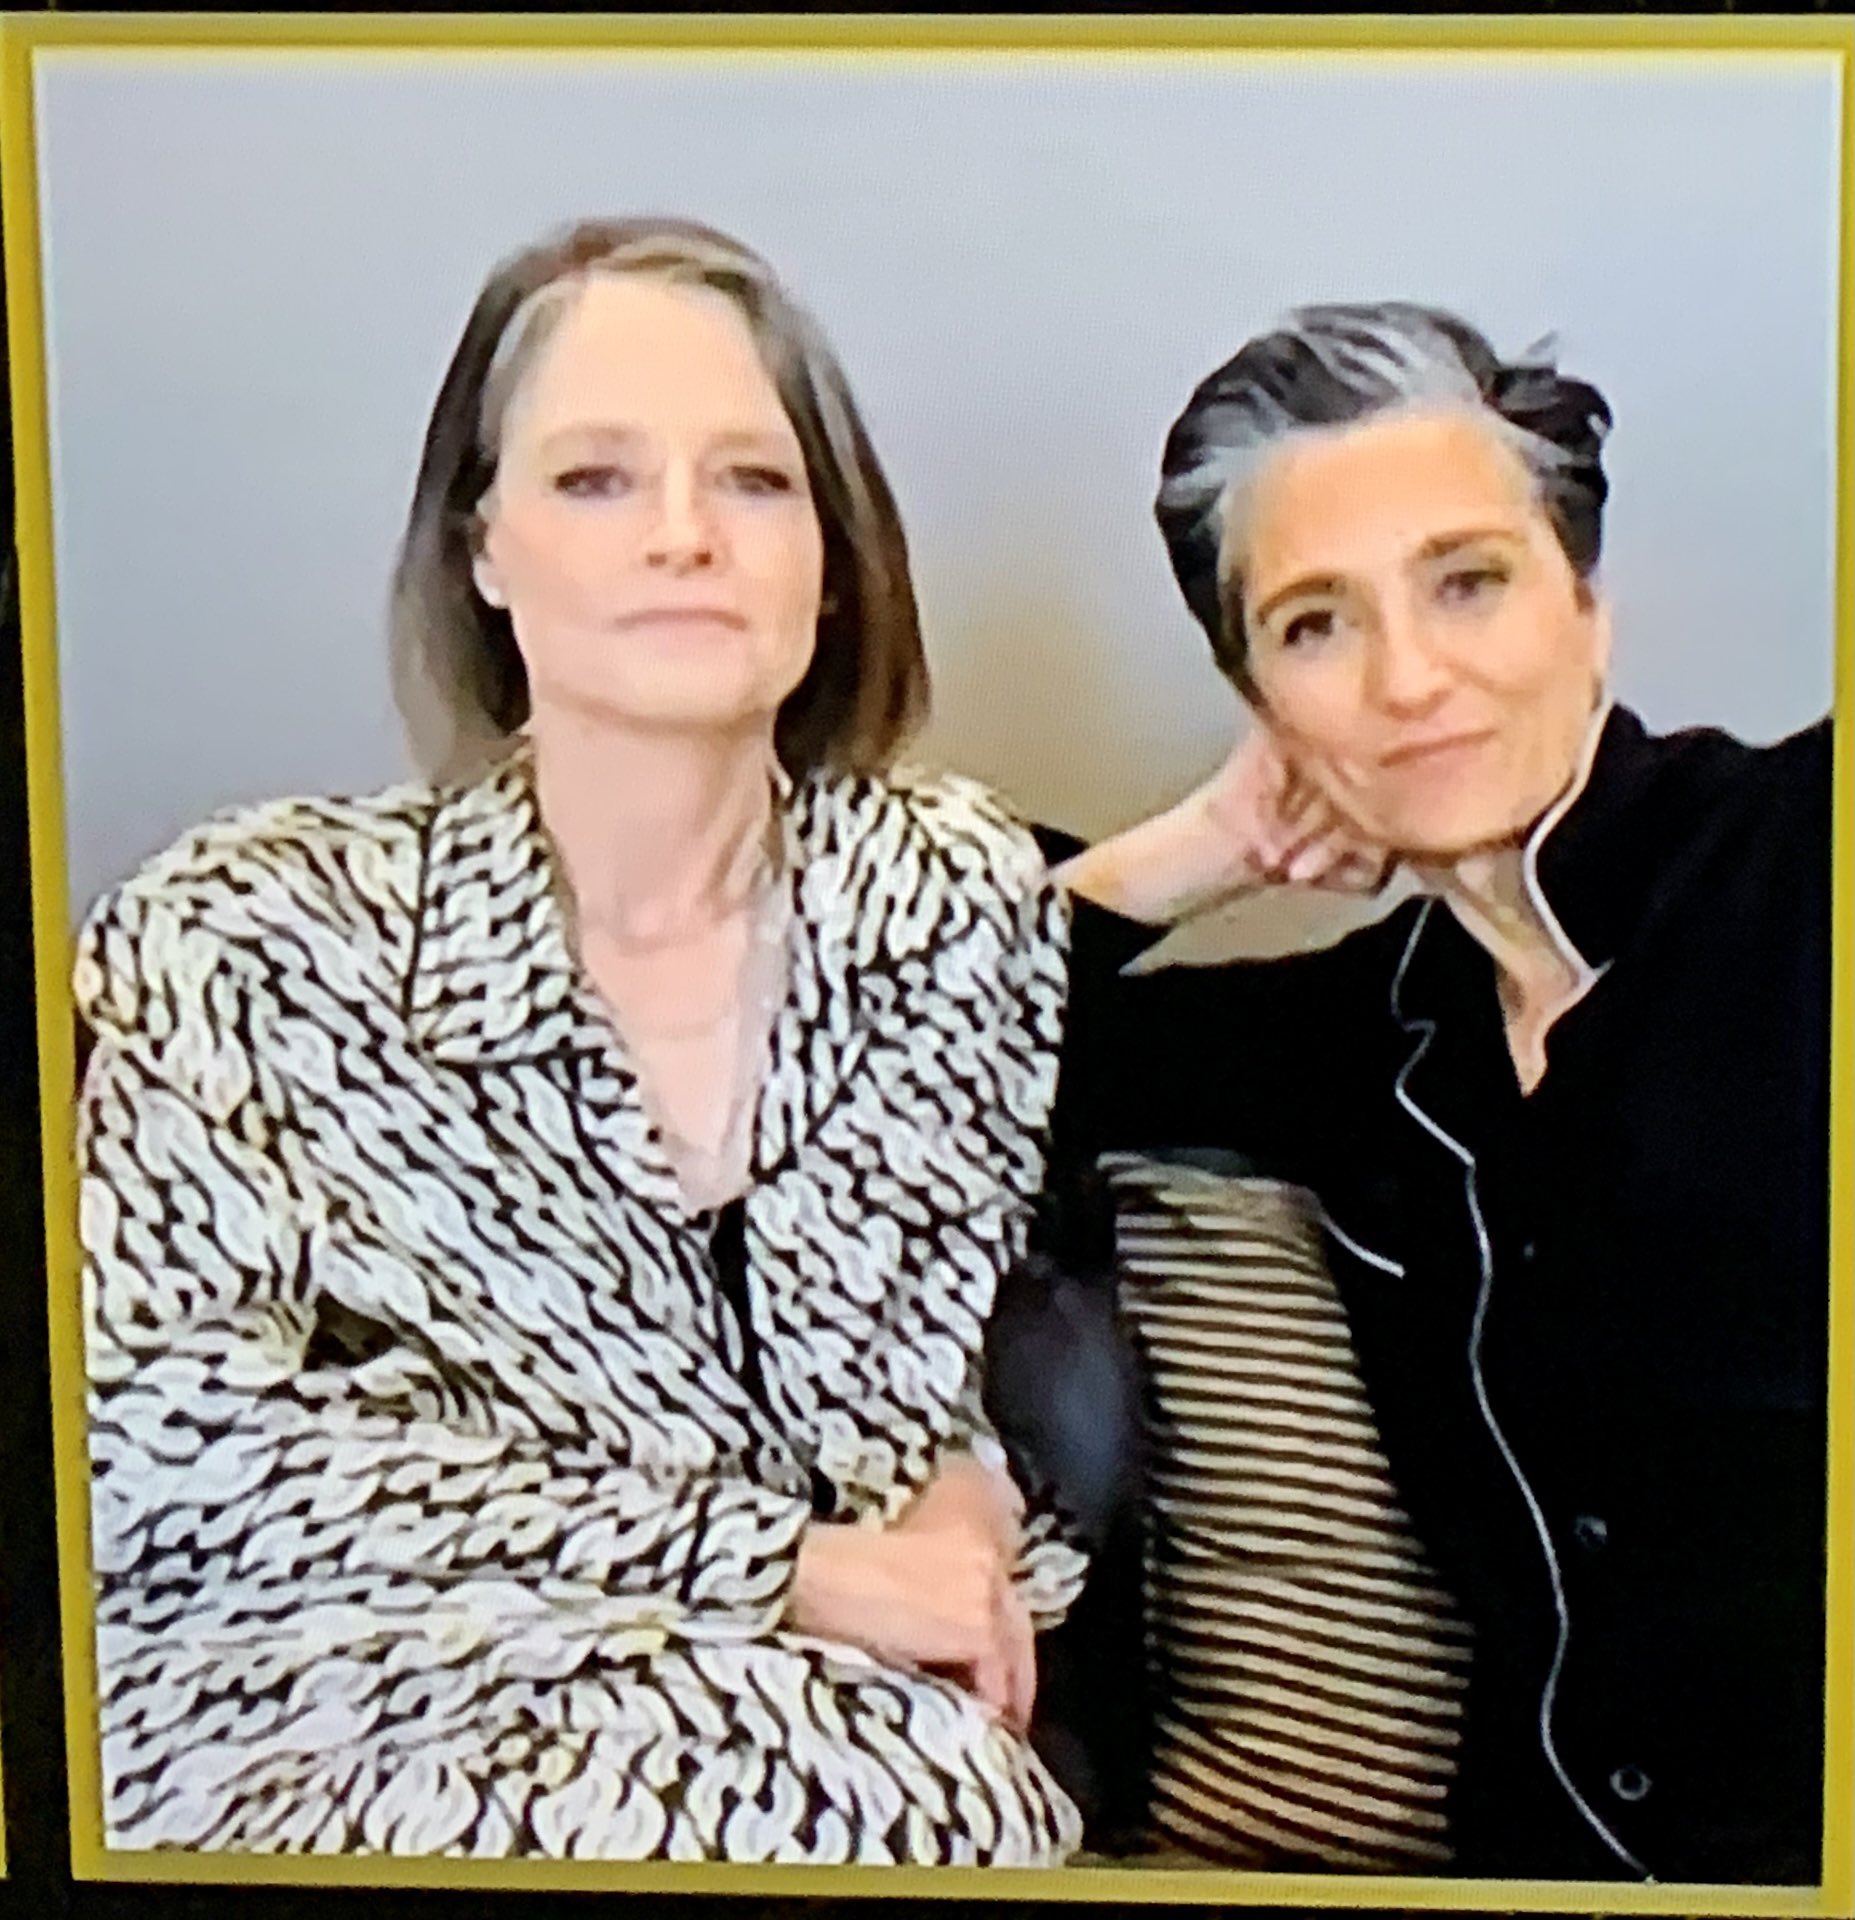 Dorothy Snarker on X: Jodie Foster and her wife Alexandra Hedison